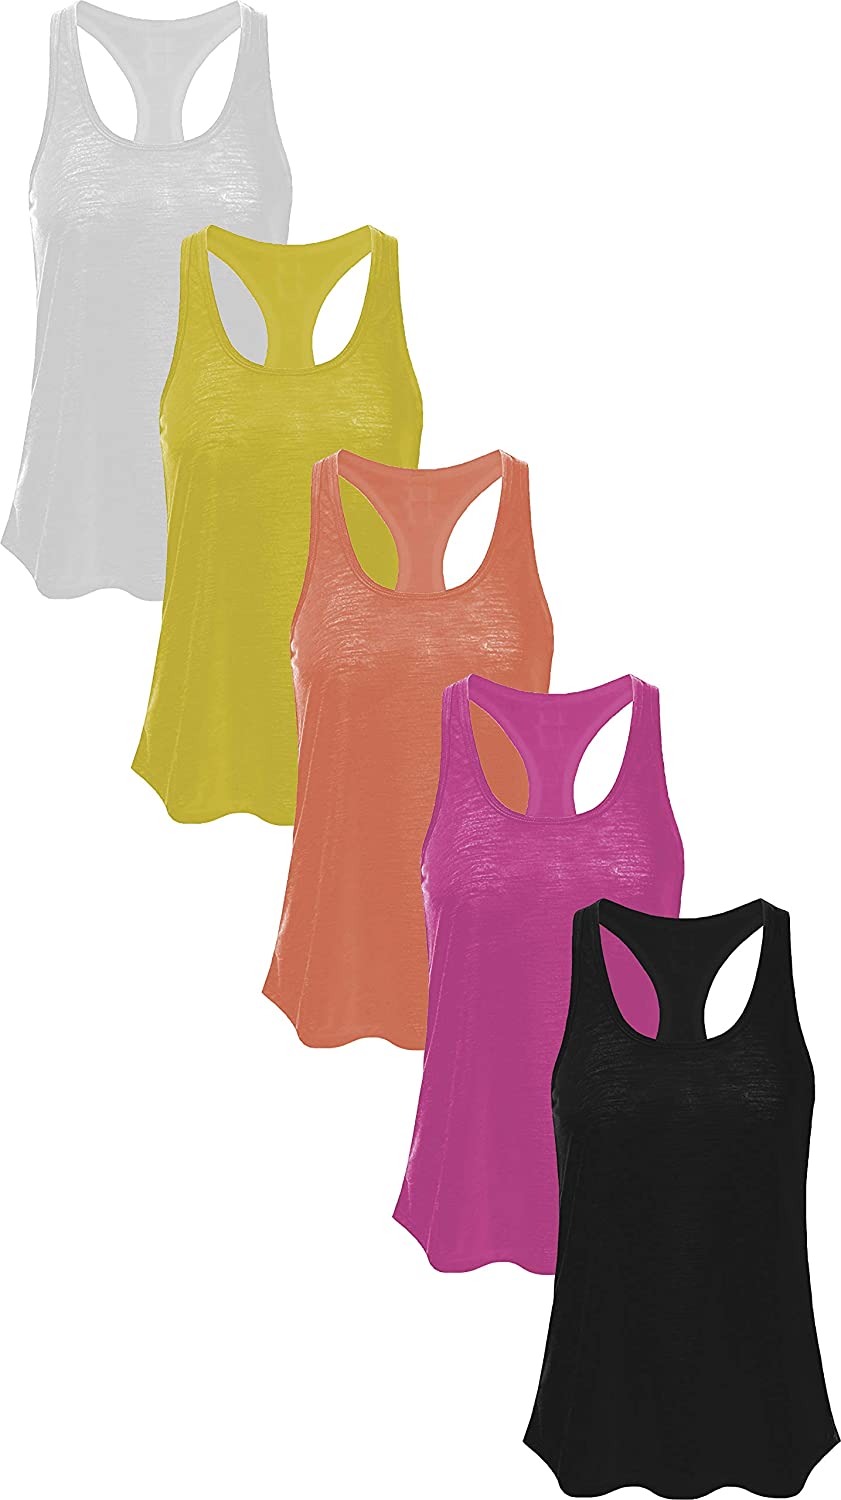 Women's 5 Pack Everyday Flowy Burnout Racer Back Active Workout Tank Tops |  eBay